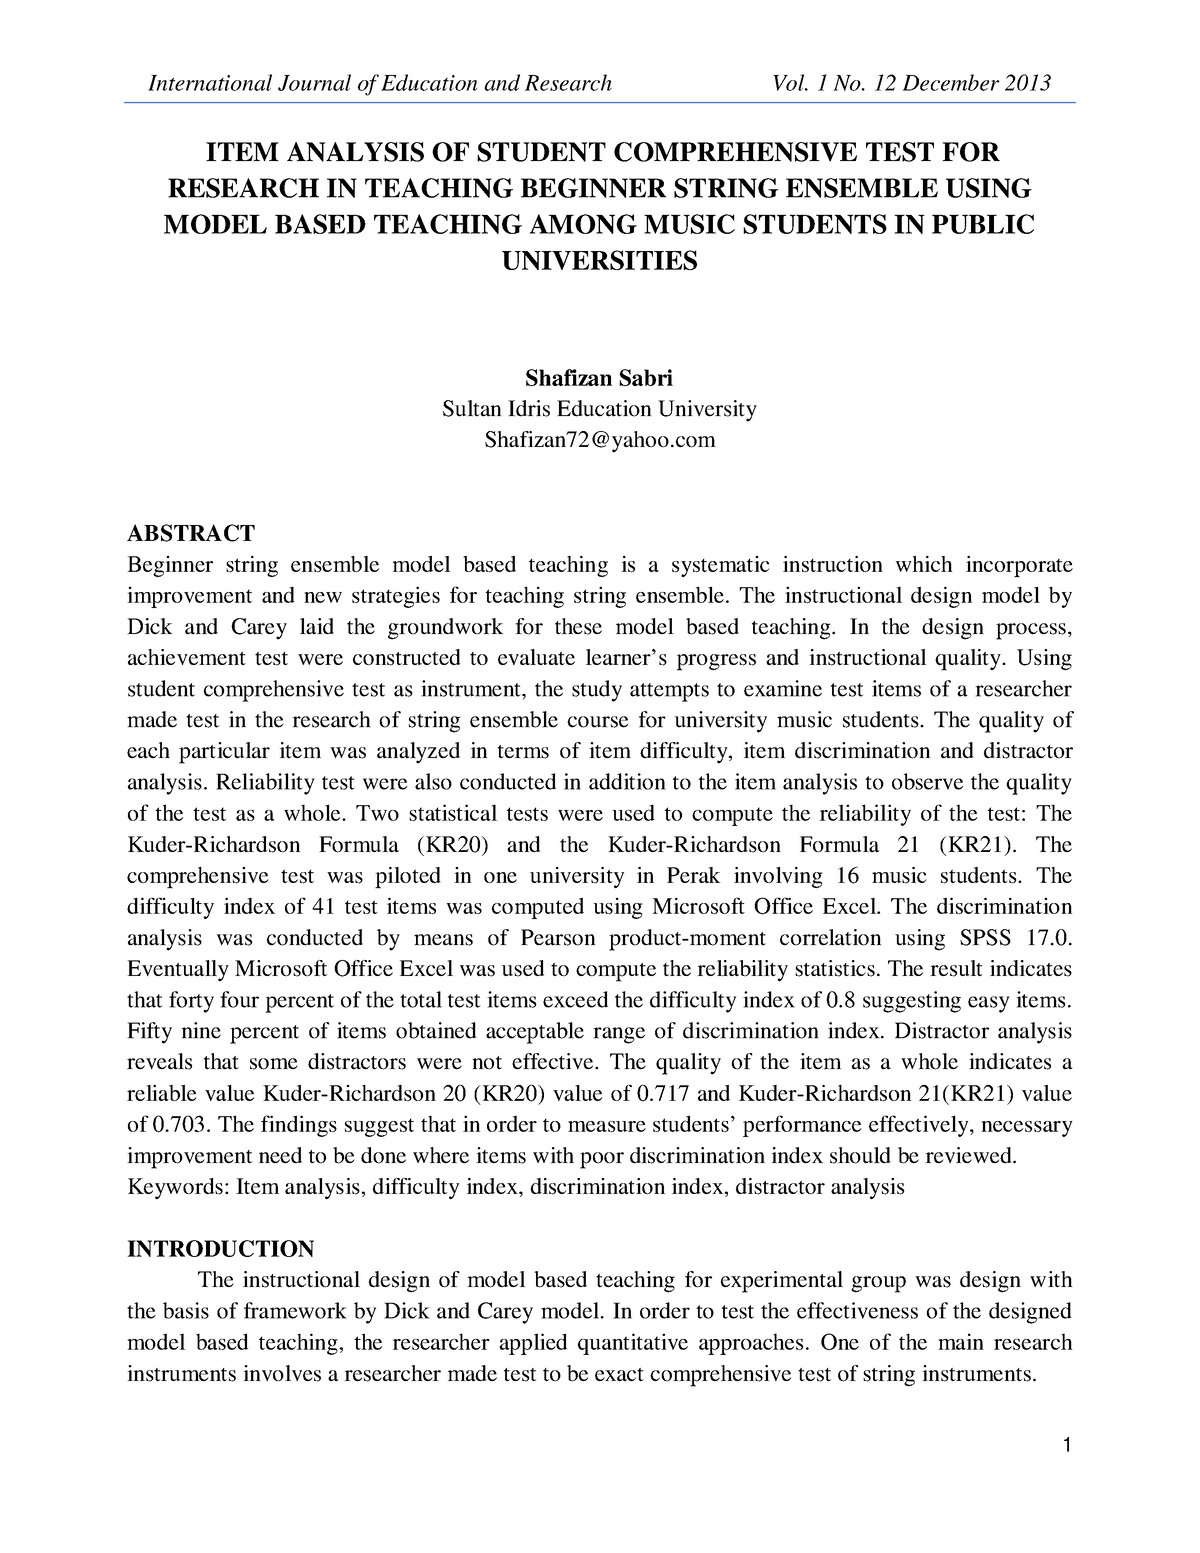 international journal of evaluation and research in education